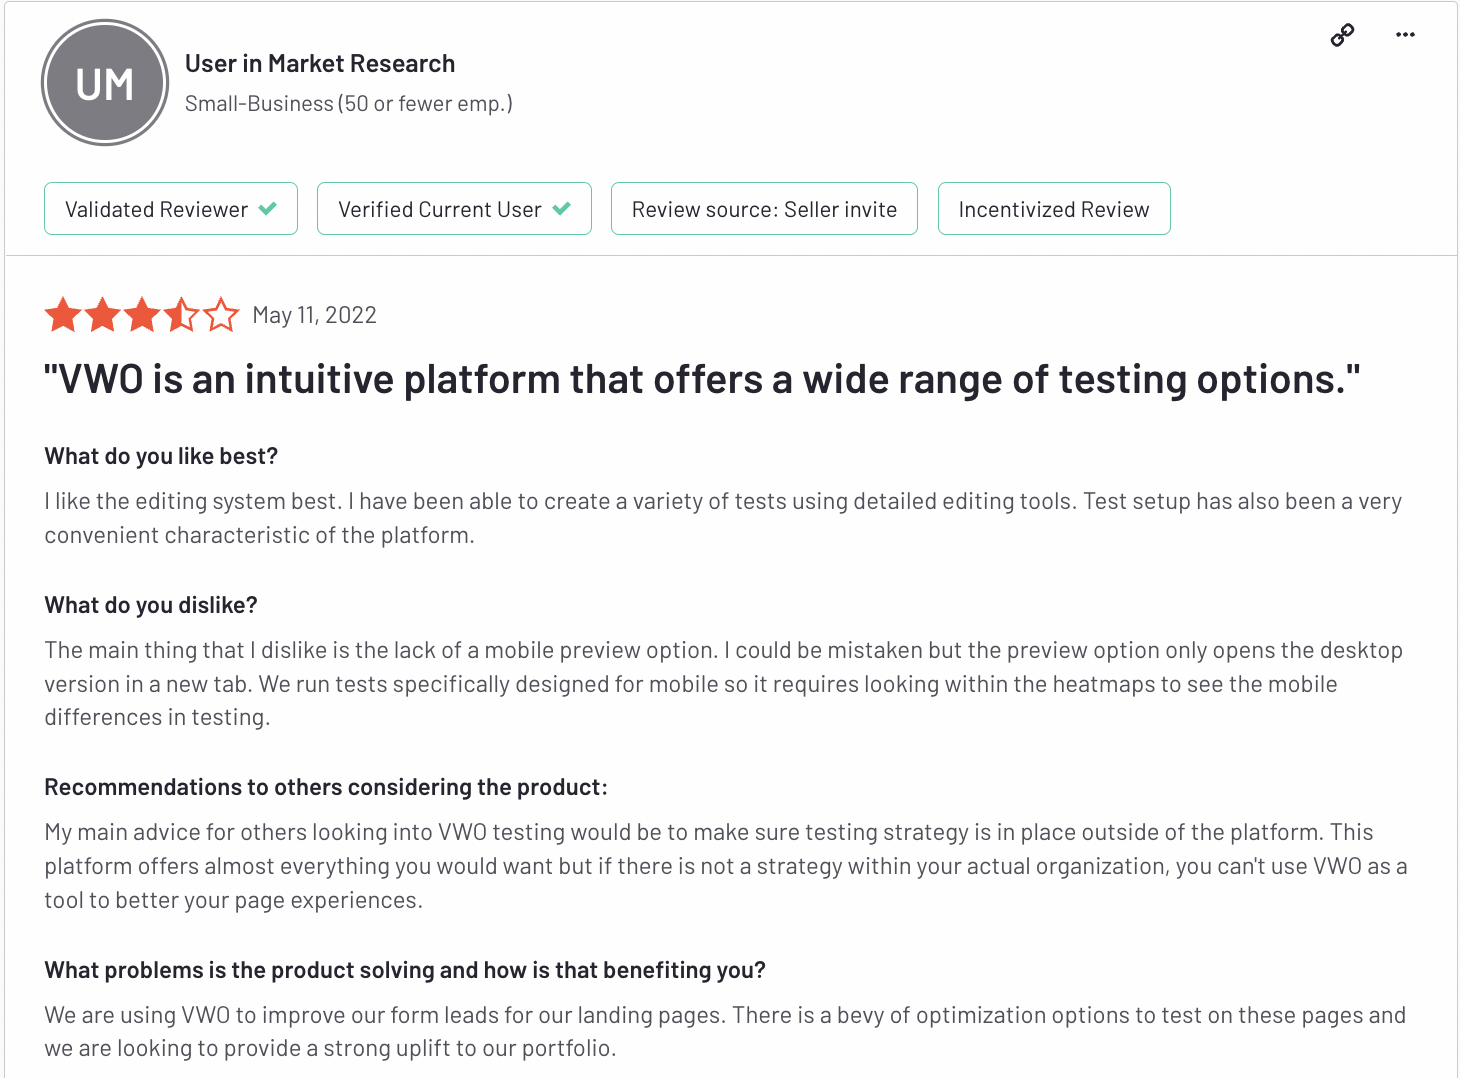 VWO Review and A/B testing capabilities